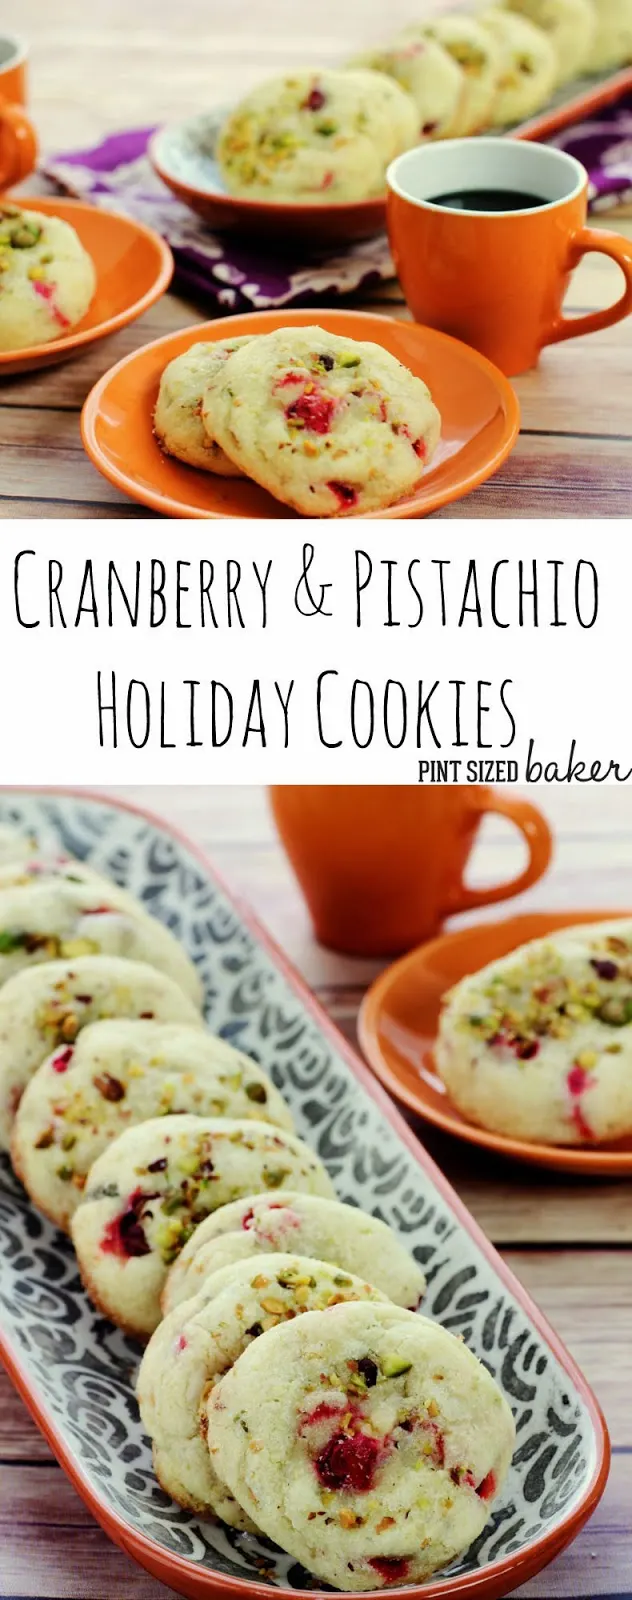 Yummy Sugar Cookies with Cranberries and Pistachios are a great way to enjoy a childhood favorite in an adult way. 